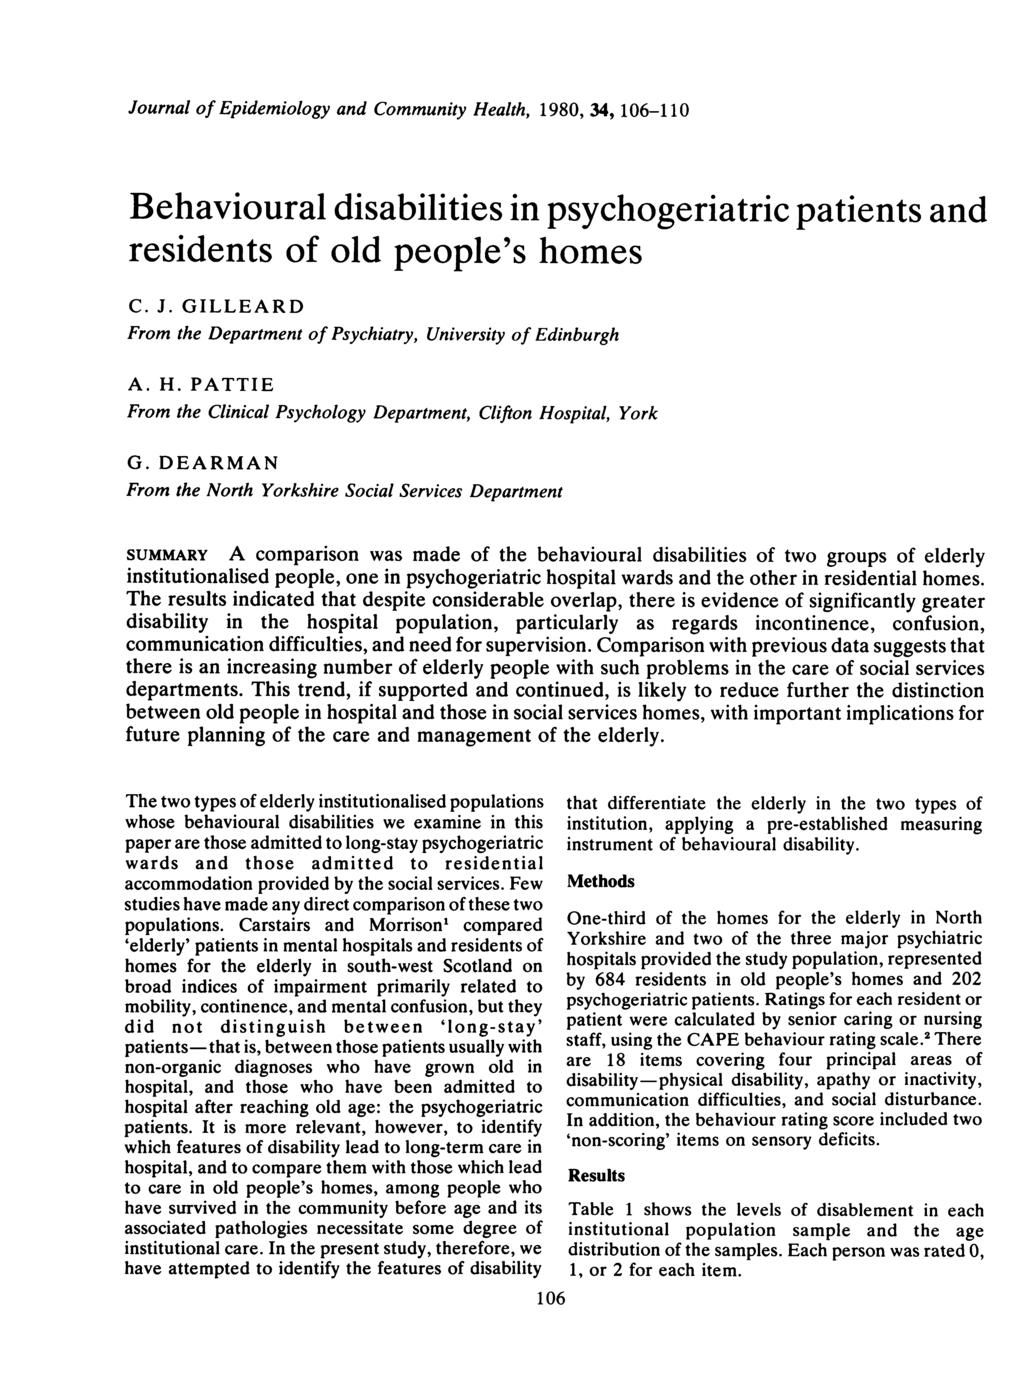 Journal of Epidemiology and Community Health, 1980, 34, 106-110 Behavioural disabilities in psychogeriatric patients and residents of old people's homes C. J.